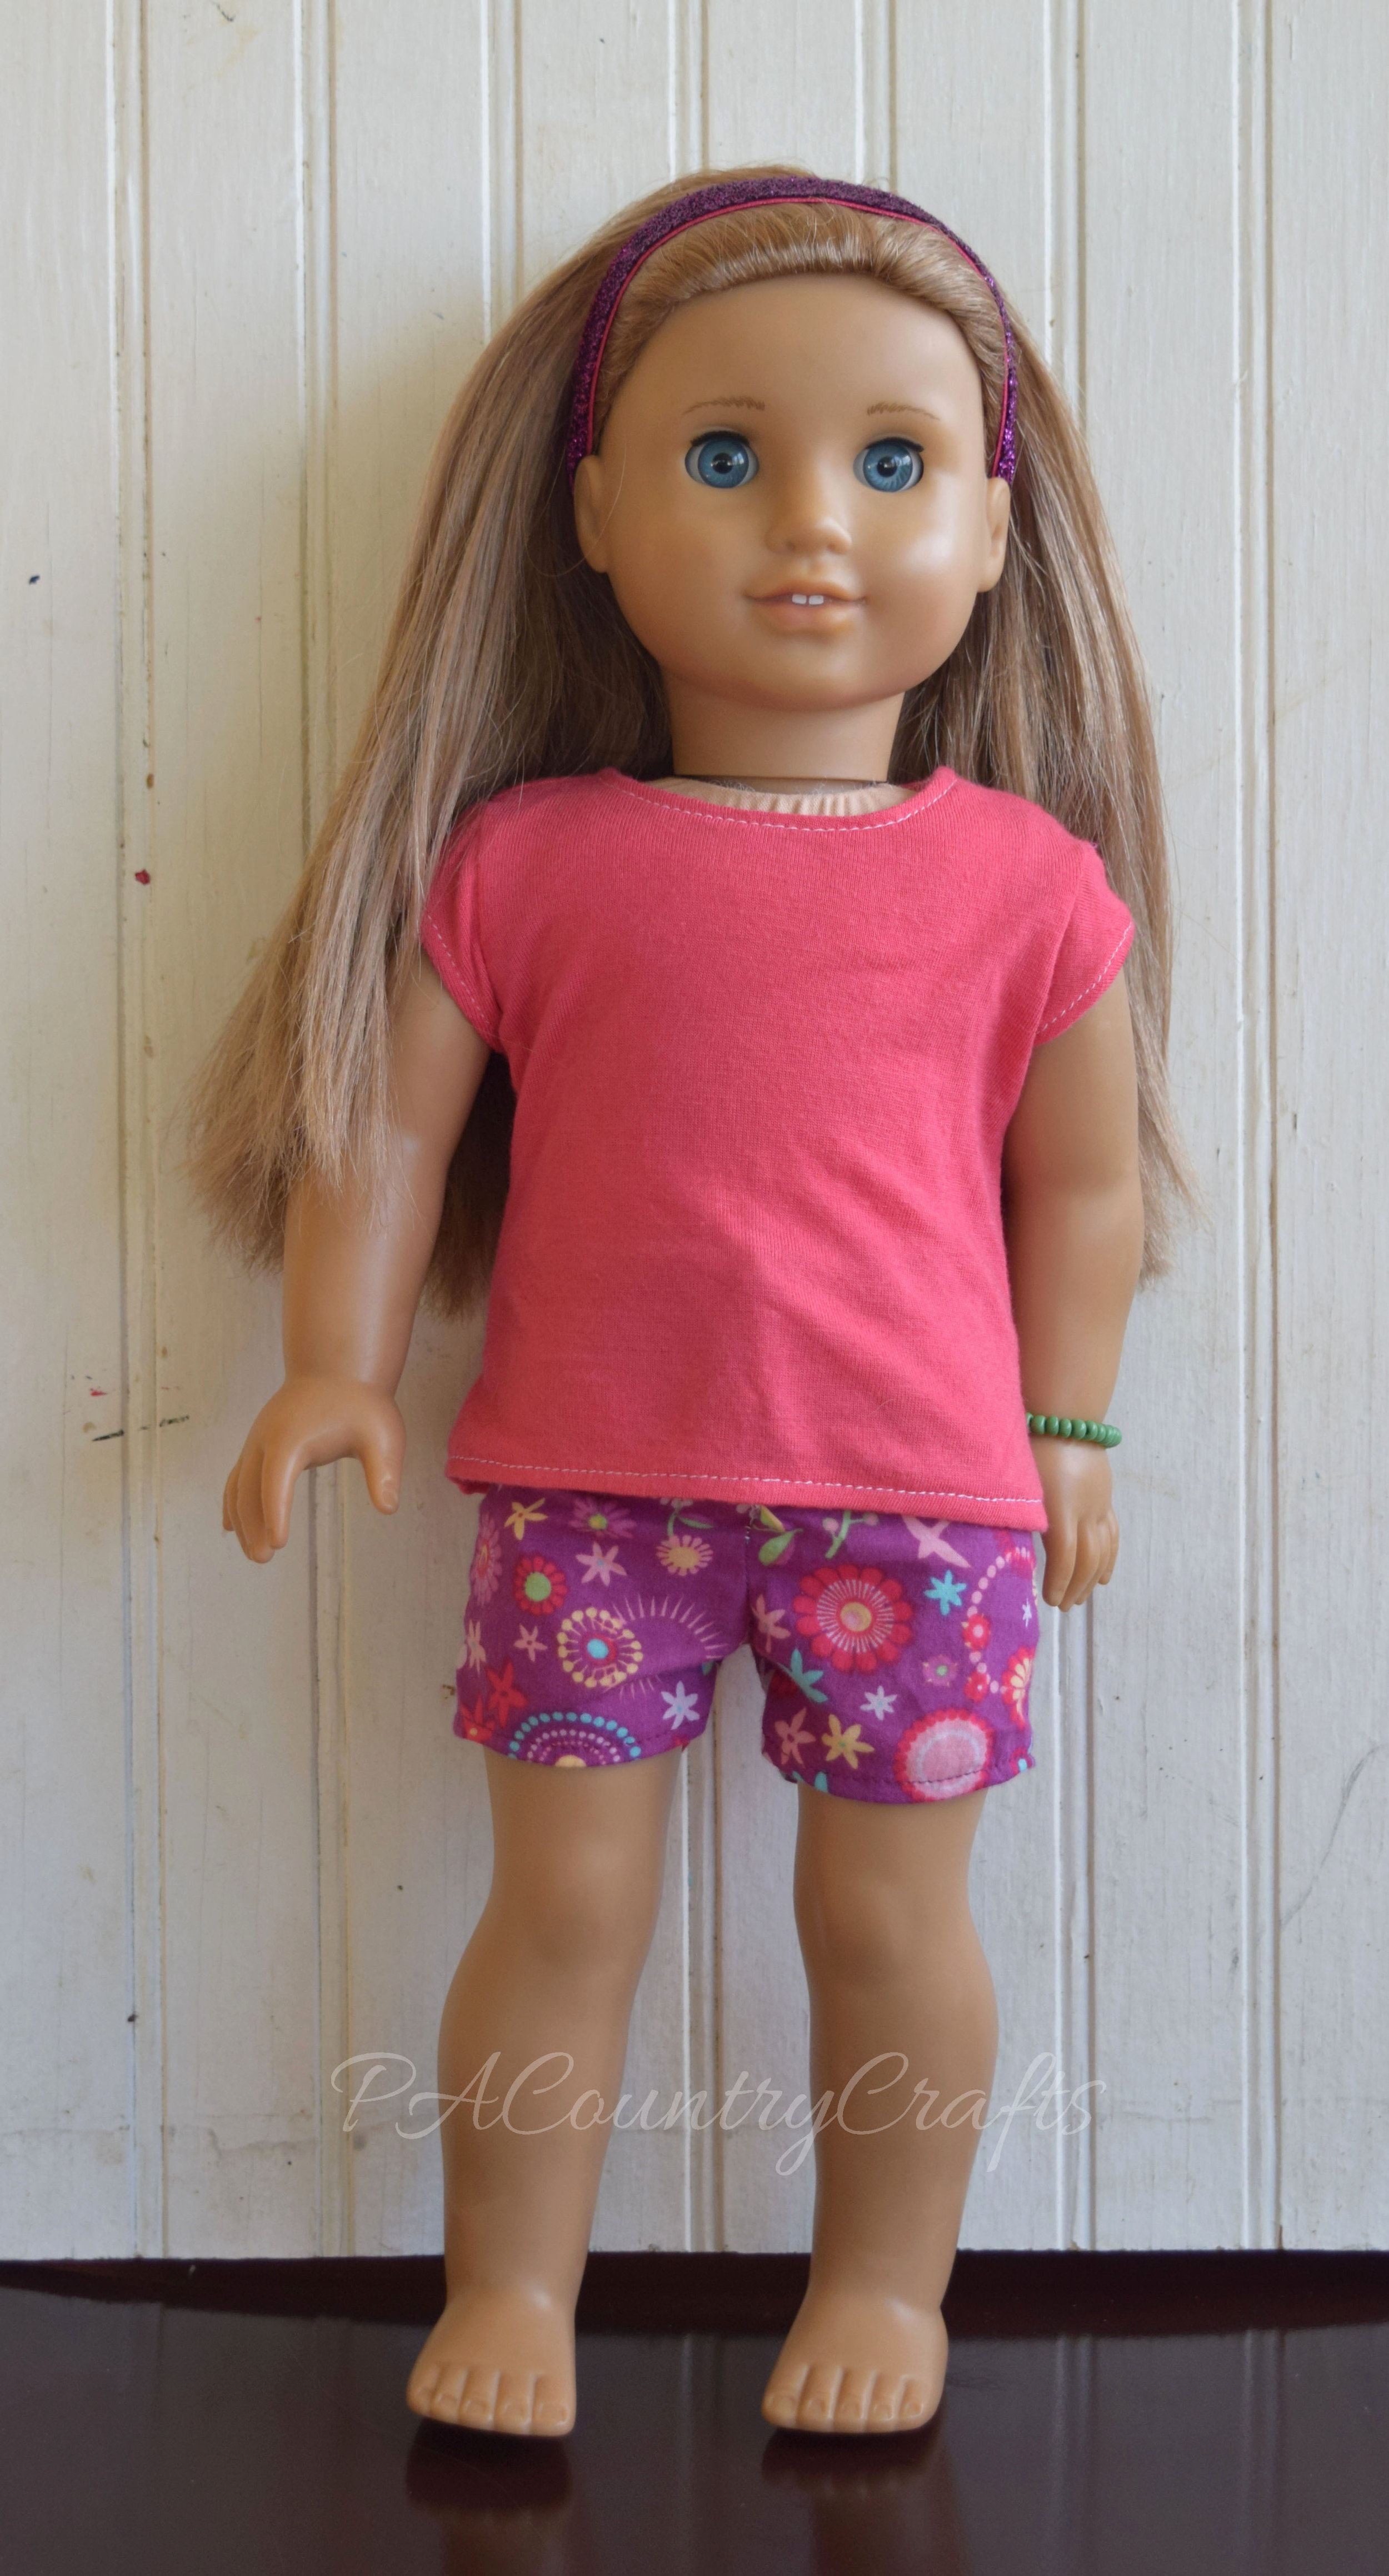 18 inch doll shorts and t shirt